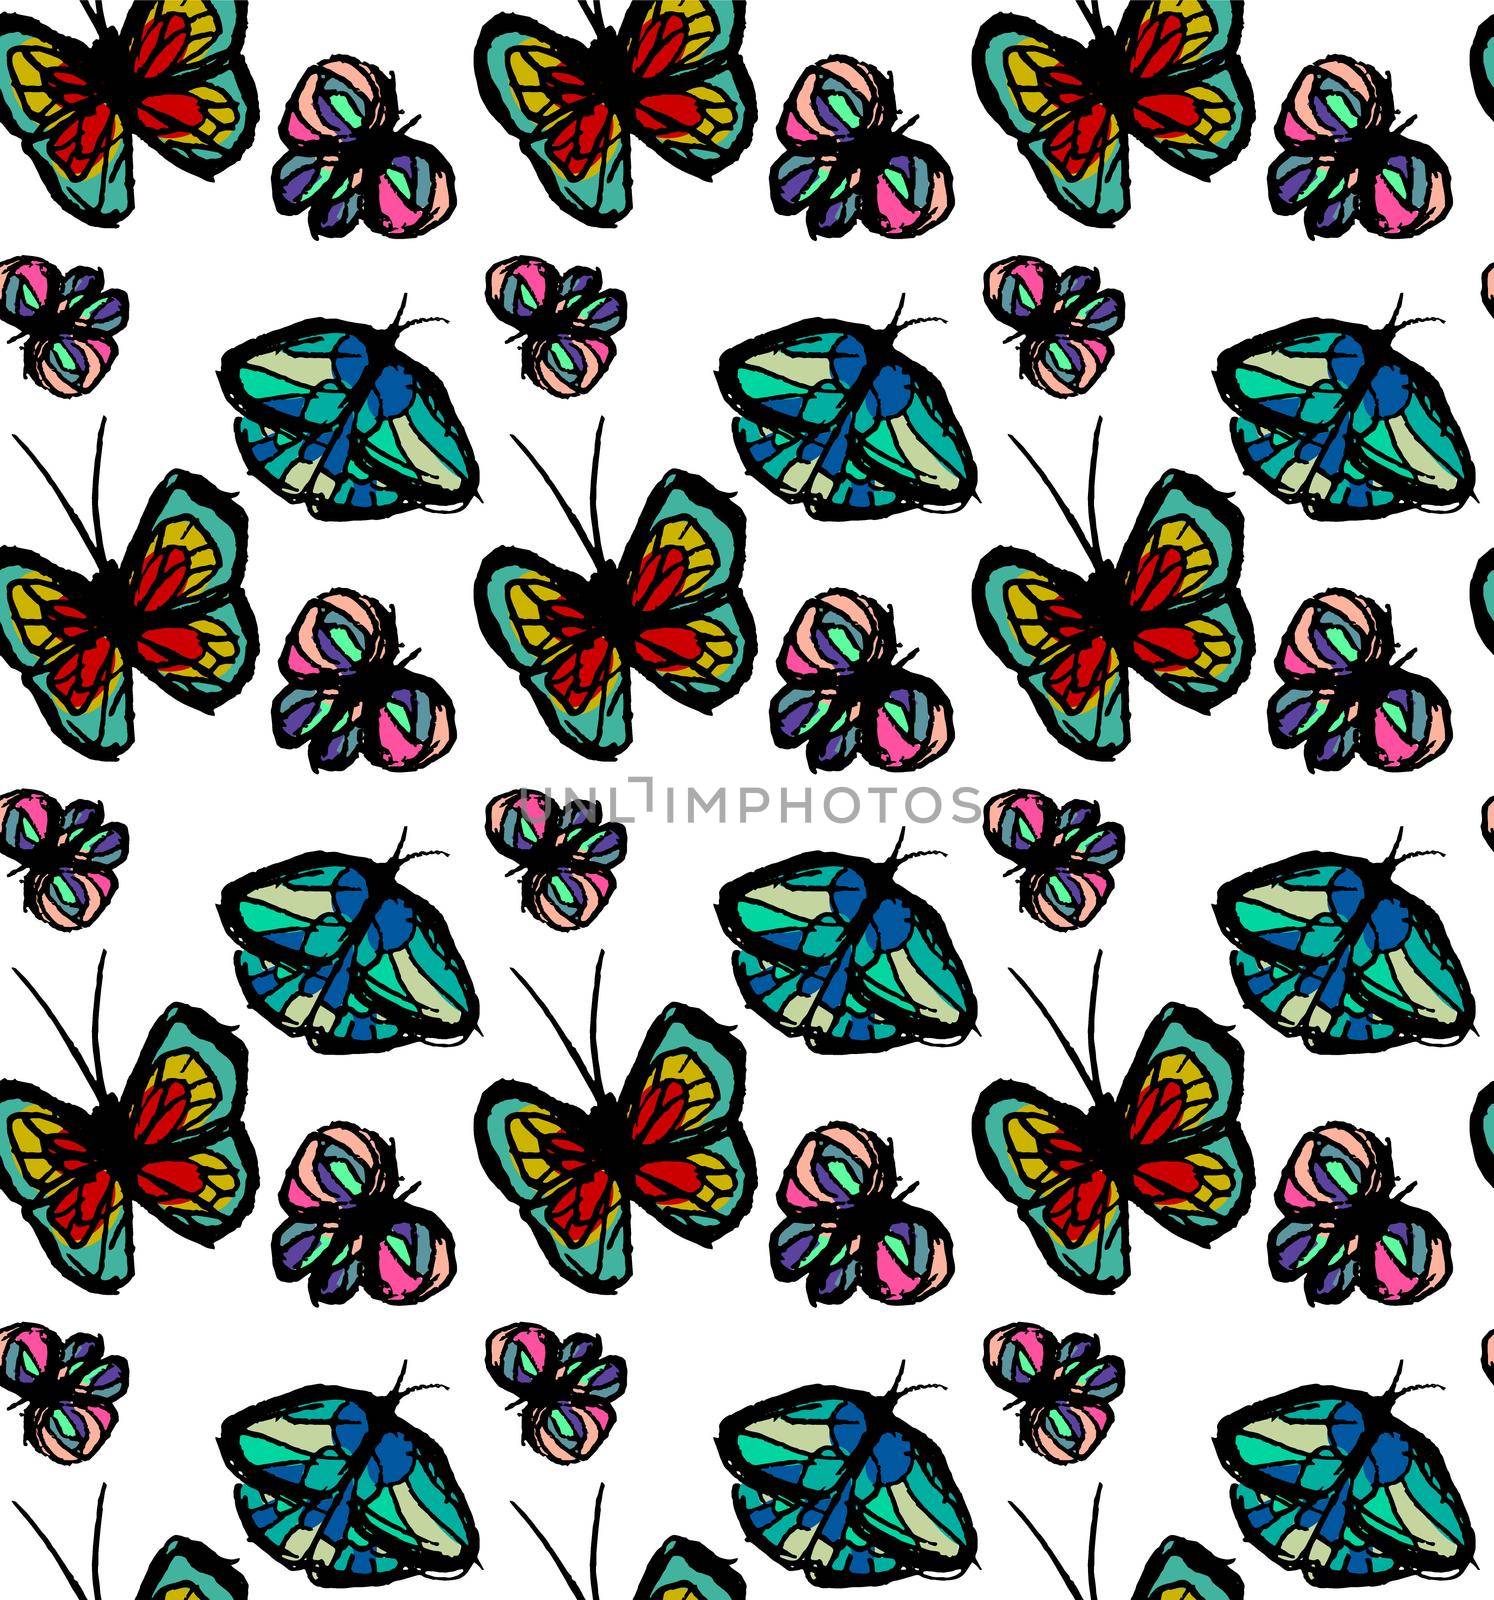 bright pattern with butterflies. Paints paint, hand drawn butterflies. by mlanaa